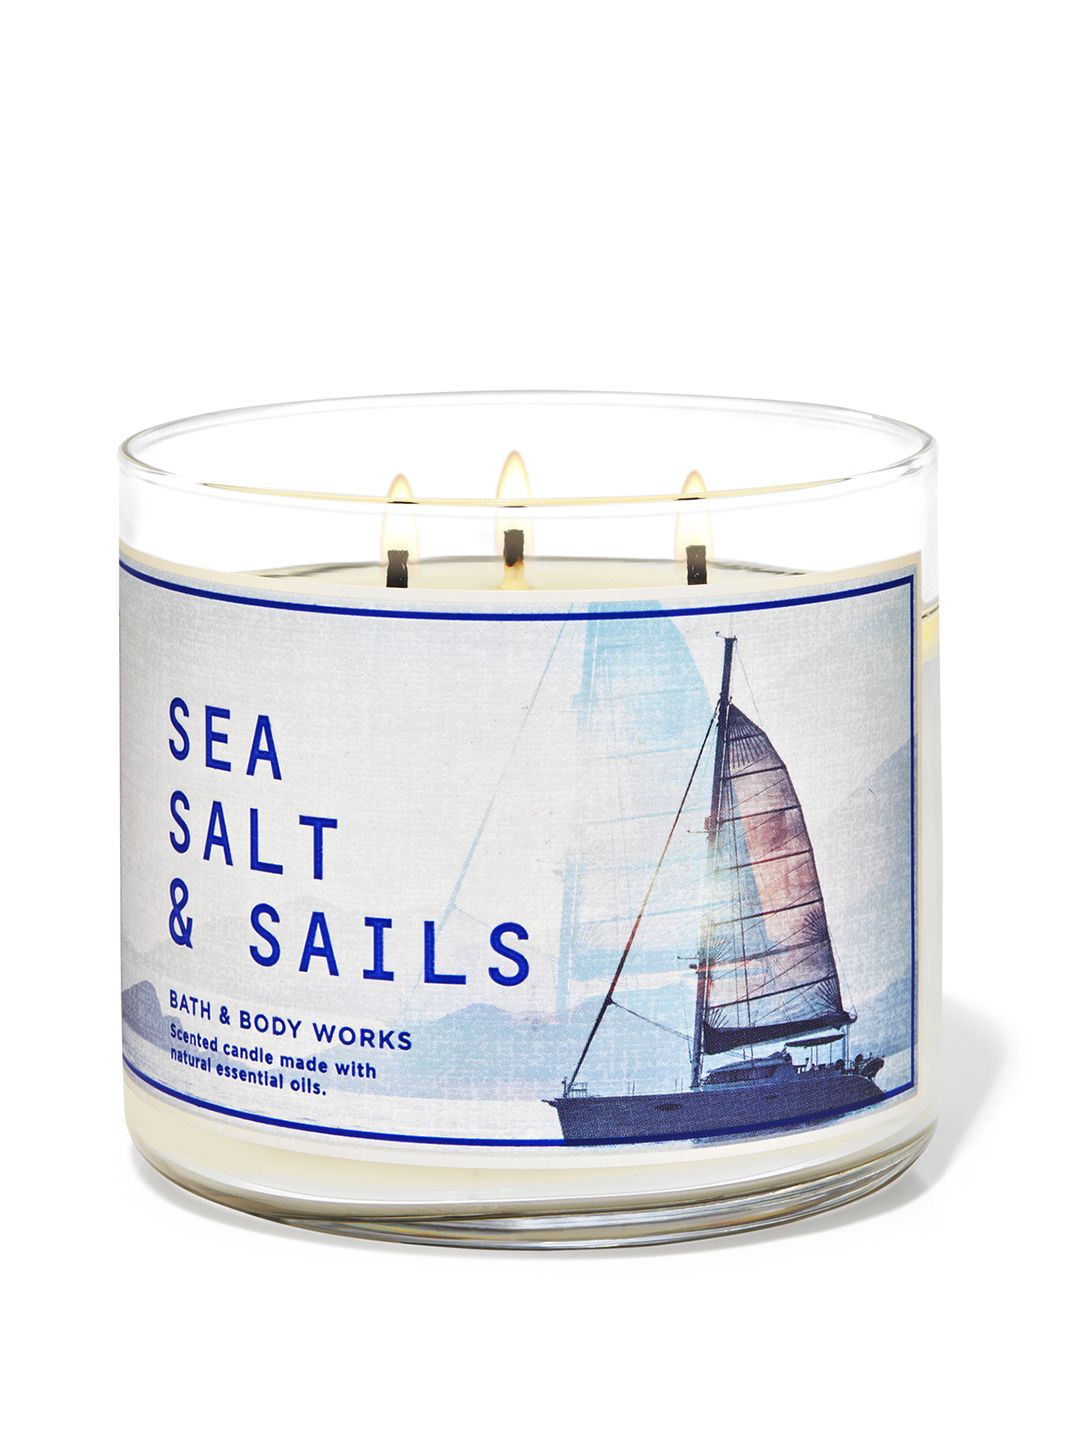 Bath & Body Works Sea Salt & Sails 3-Wick Scented Candle with Essential Oils - 411g Price in India